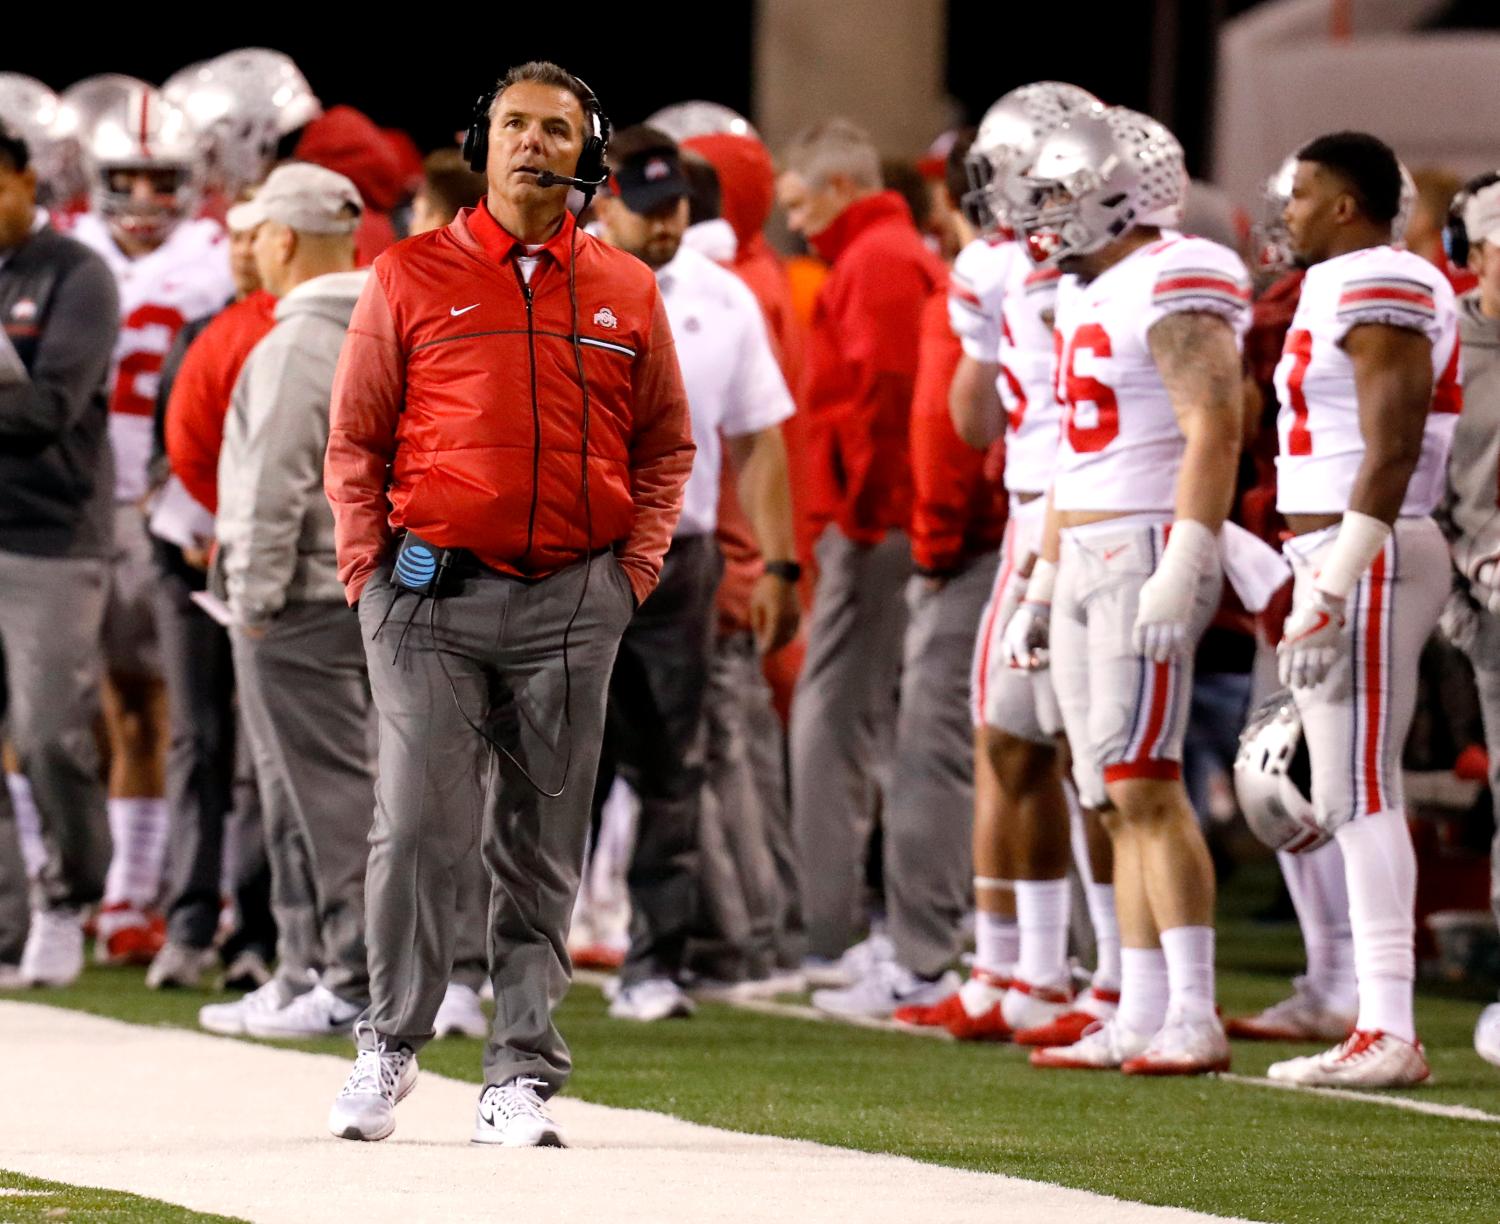 Oct 14, 2017; Lincoln, NE, USA; Ohio State Buckeyes head coach Urban Meyer looks at the scoreboard during the game against the Nebraska Cornhuskers in the second half at Memorial Stadium. Ohio State won 56-14. Mandatory Credit: Bruce Thorson-USA TODAY Sports - 10347589